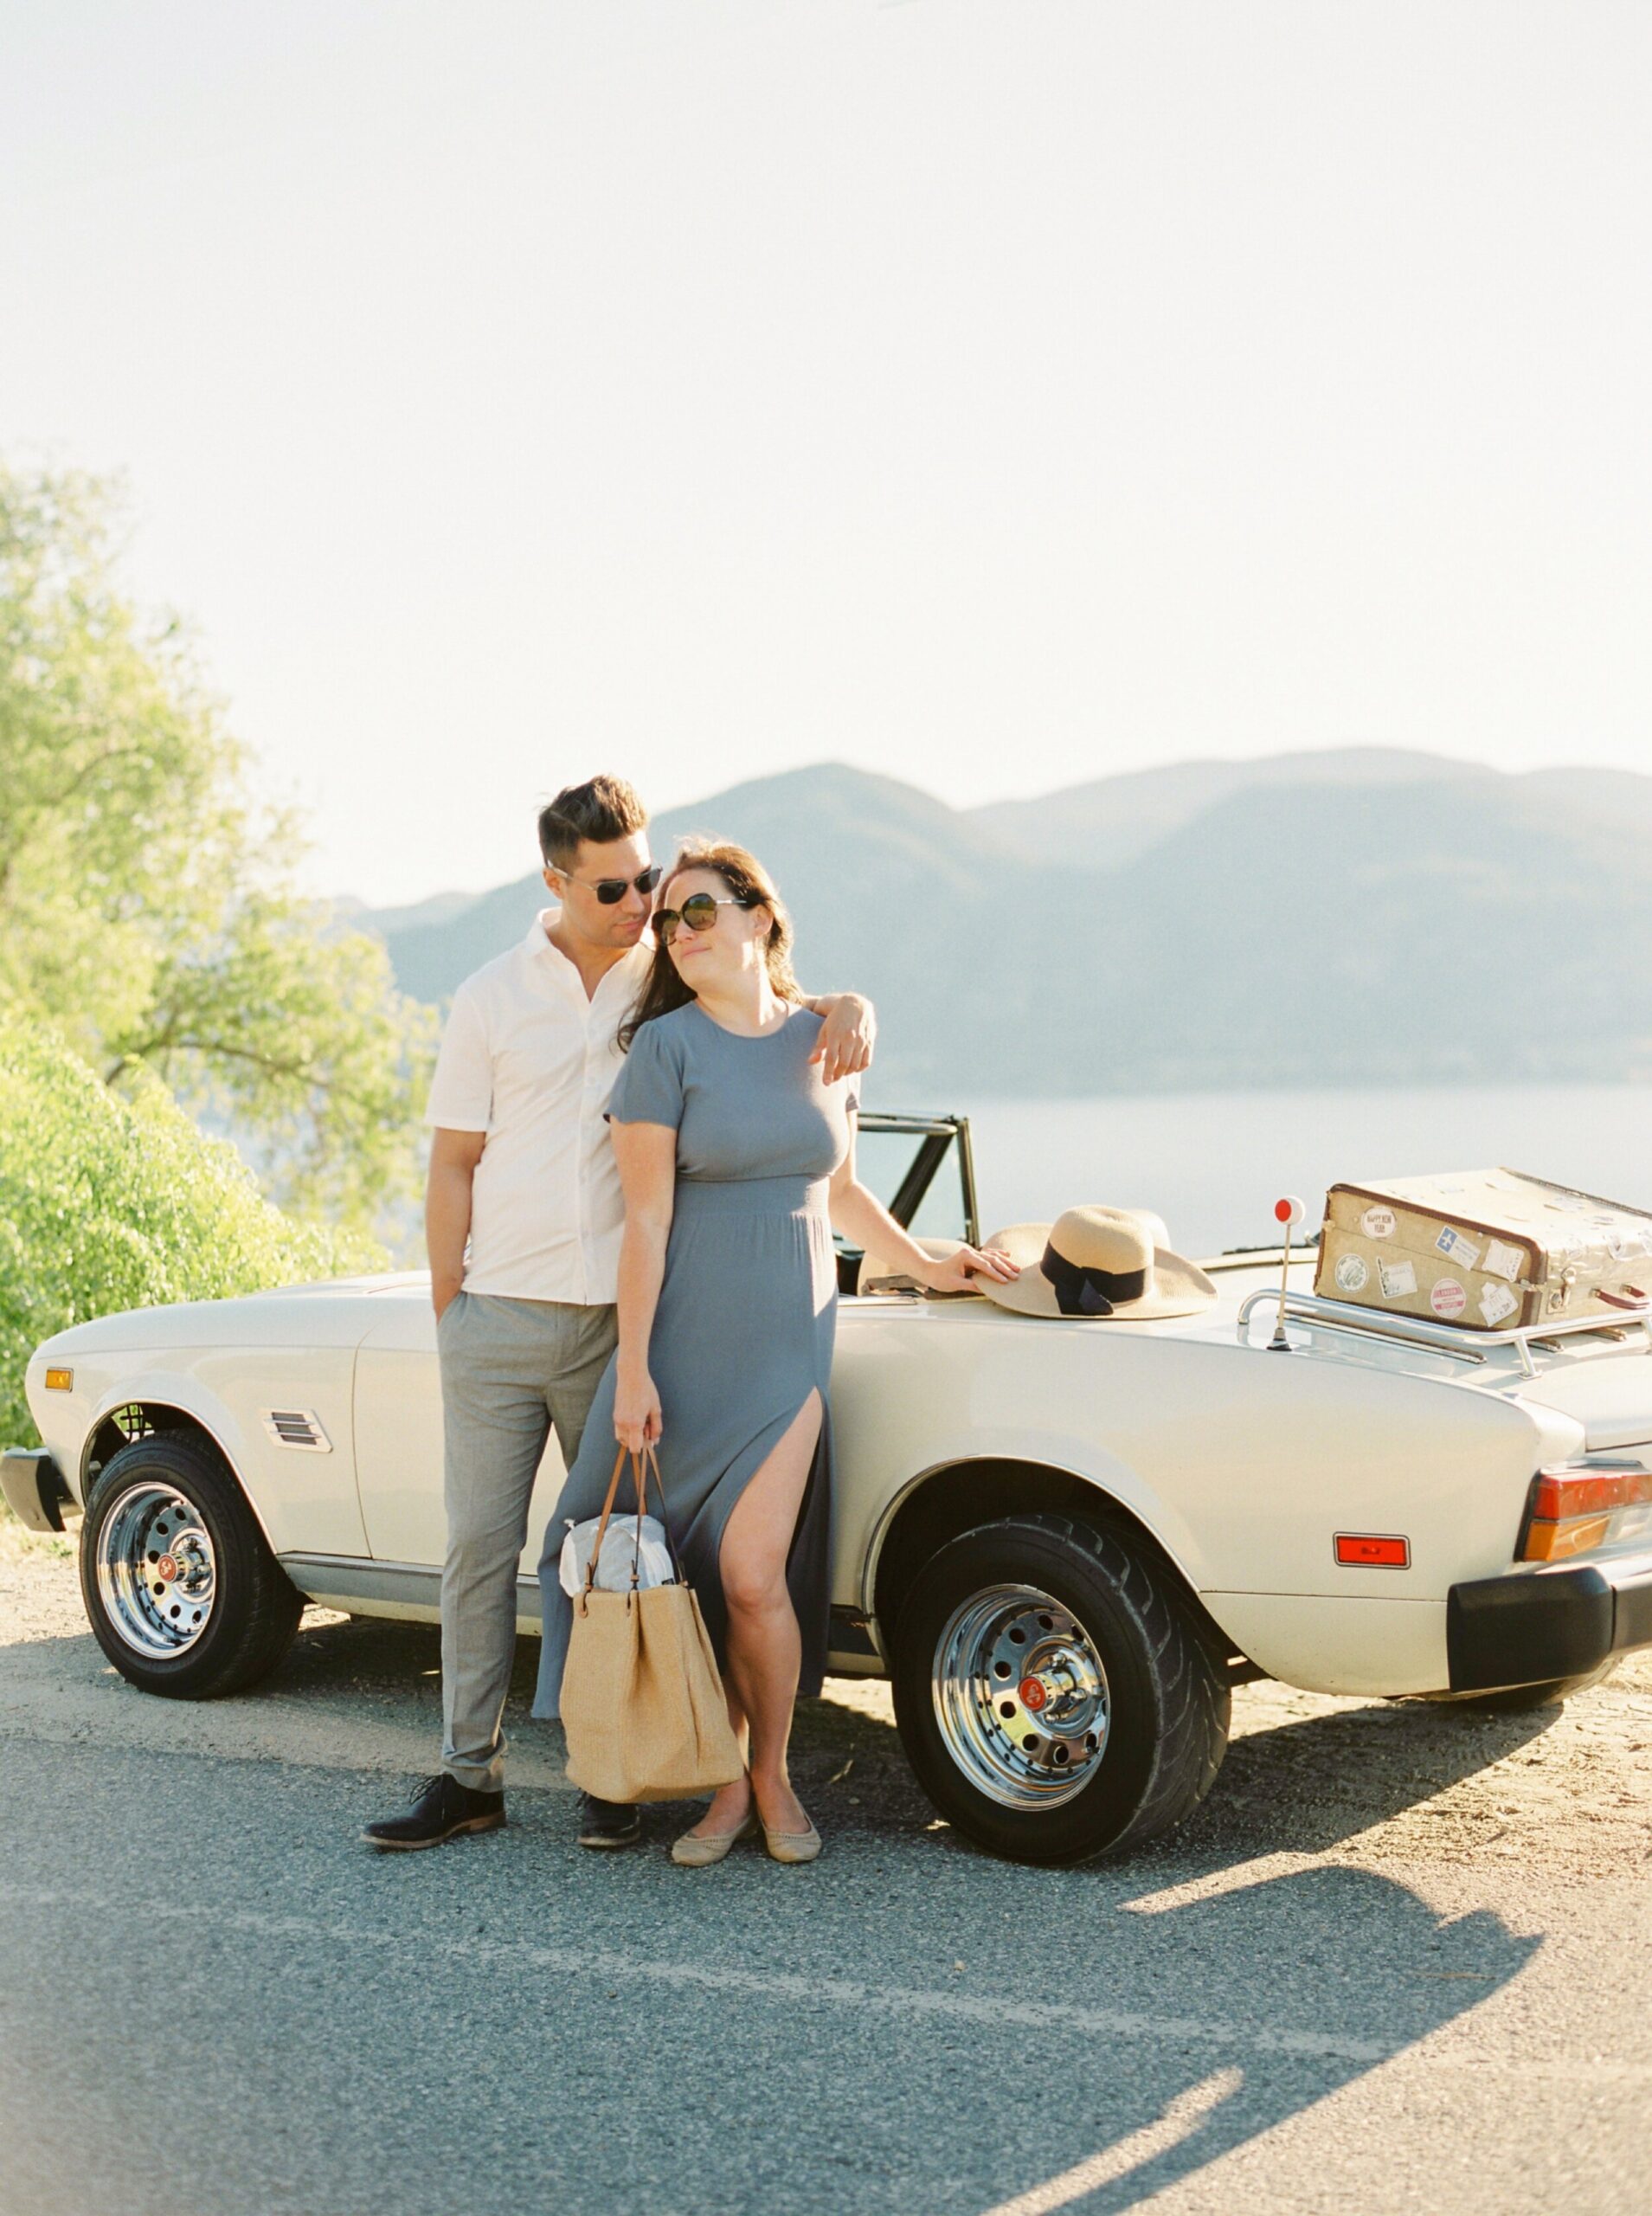  vintage white car and suitcase for a fun road trip in kelowna okanagan penticton vineyard on the naramata bench | summer engagement session | outfit ideas for couples photos | film photographer Jusitne Milton 